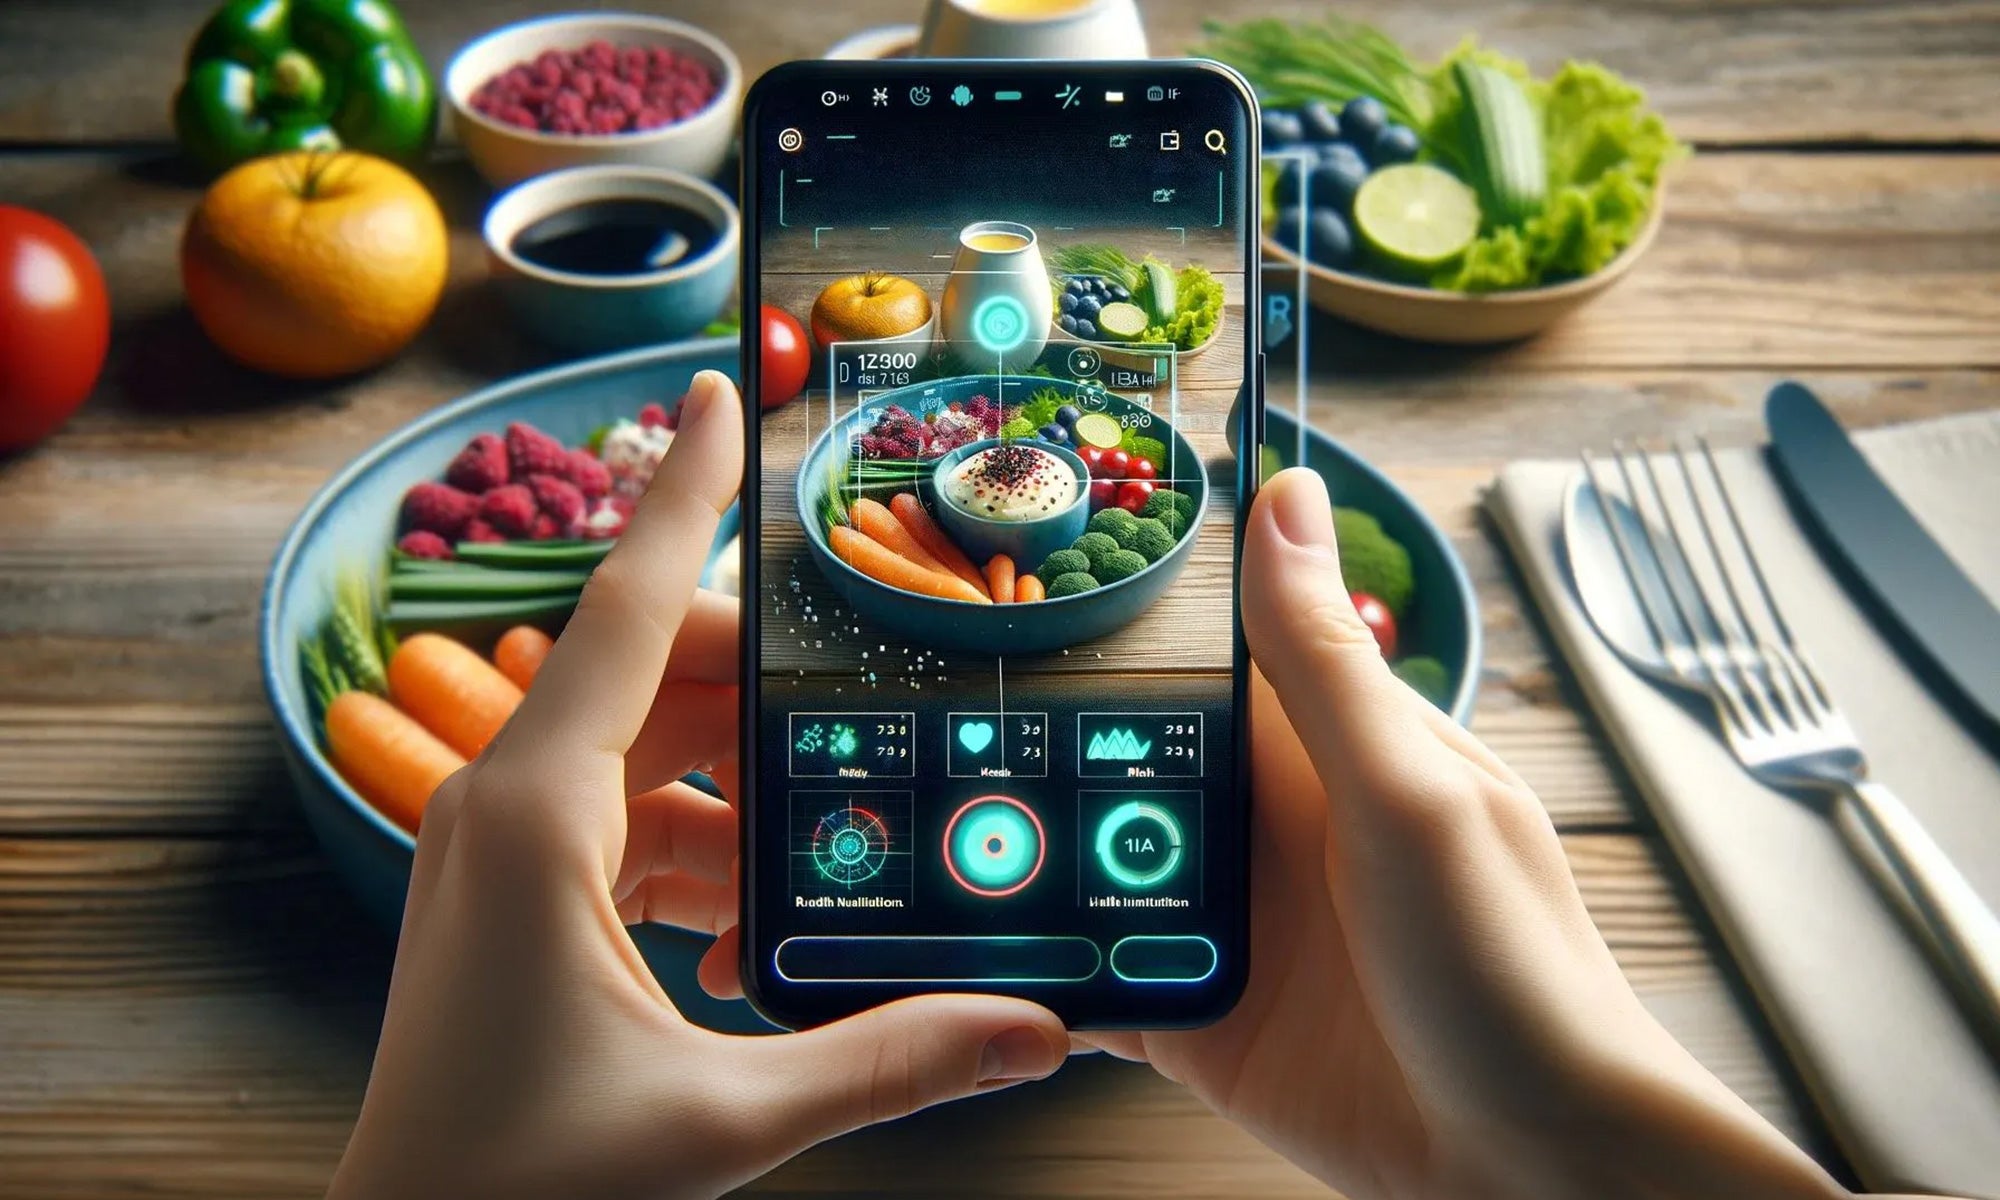 Hypothetical scenario where you can scan your food with your phone for nutrient values